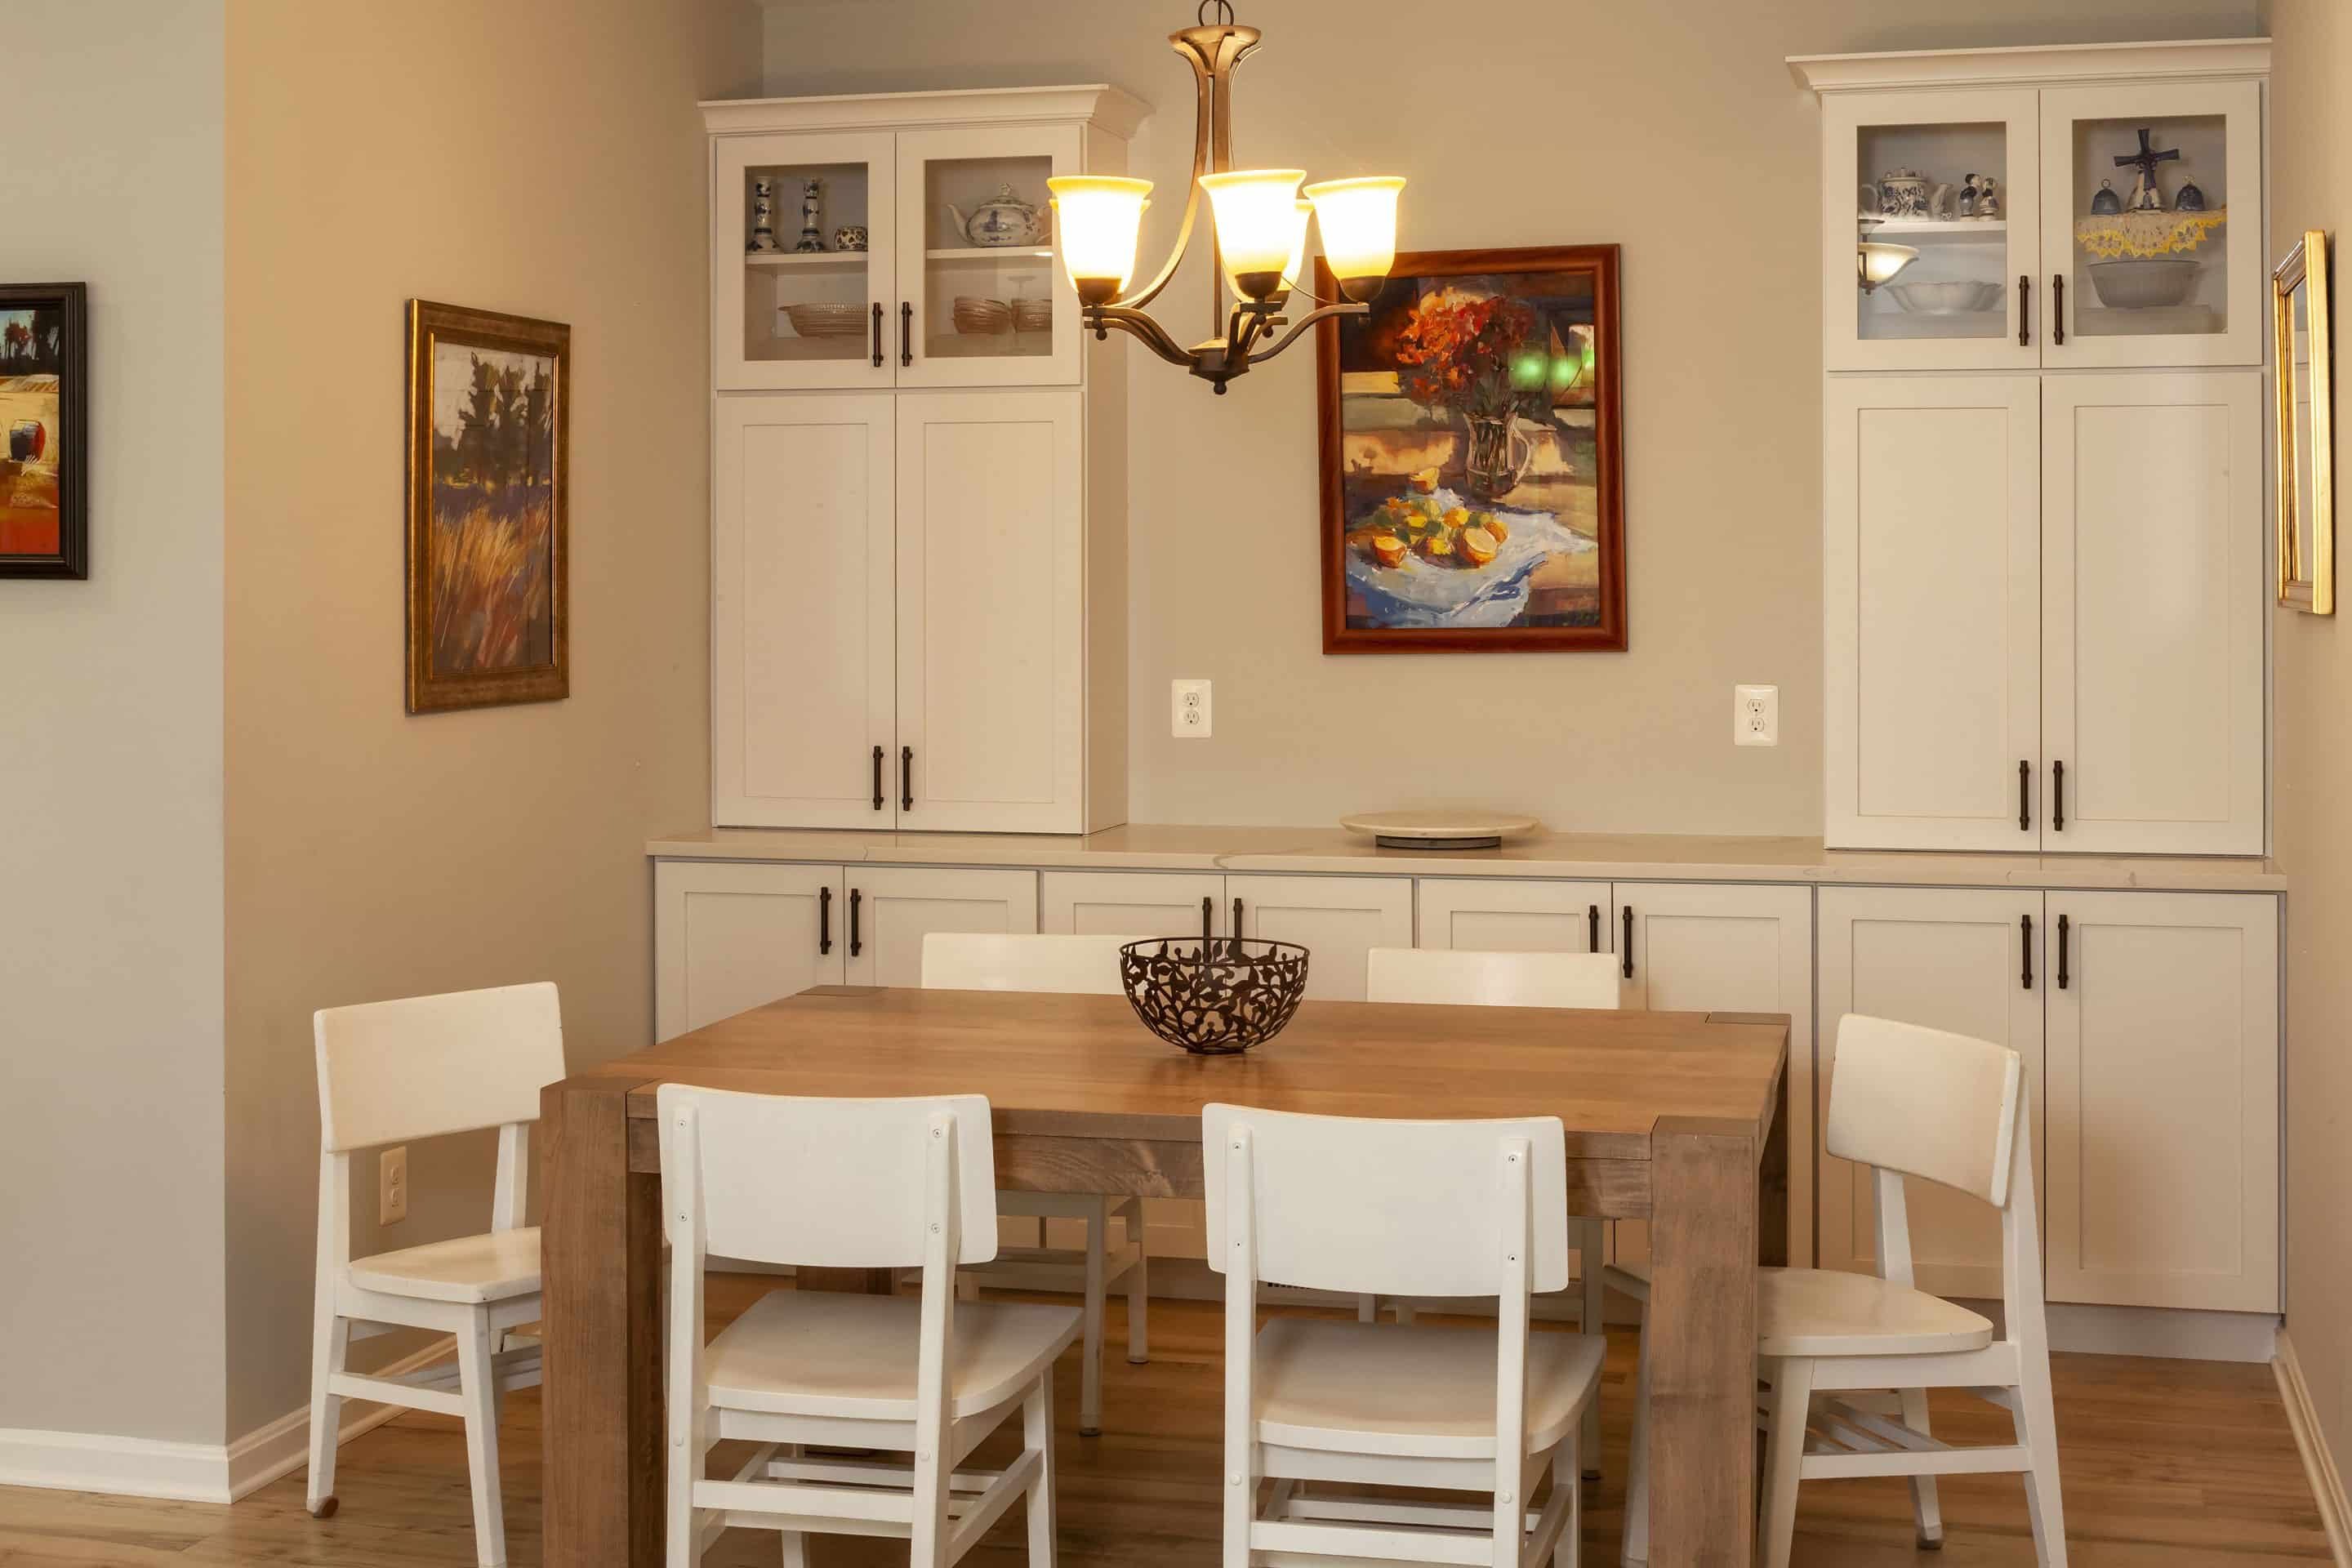 matching cabinetry in dining area for open concept